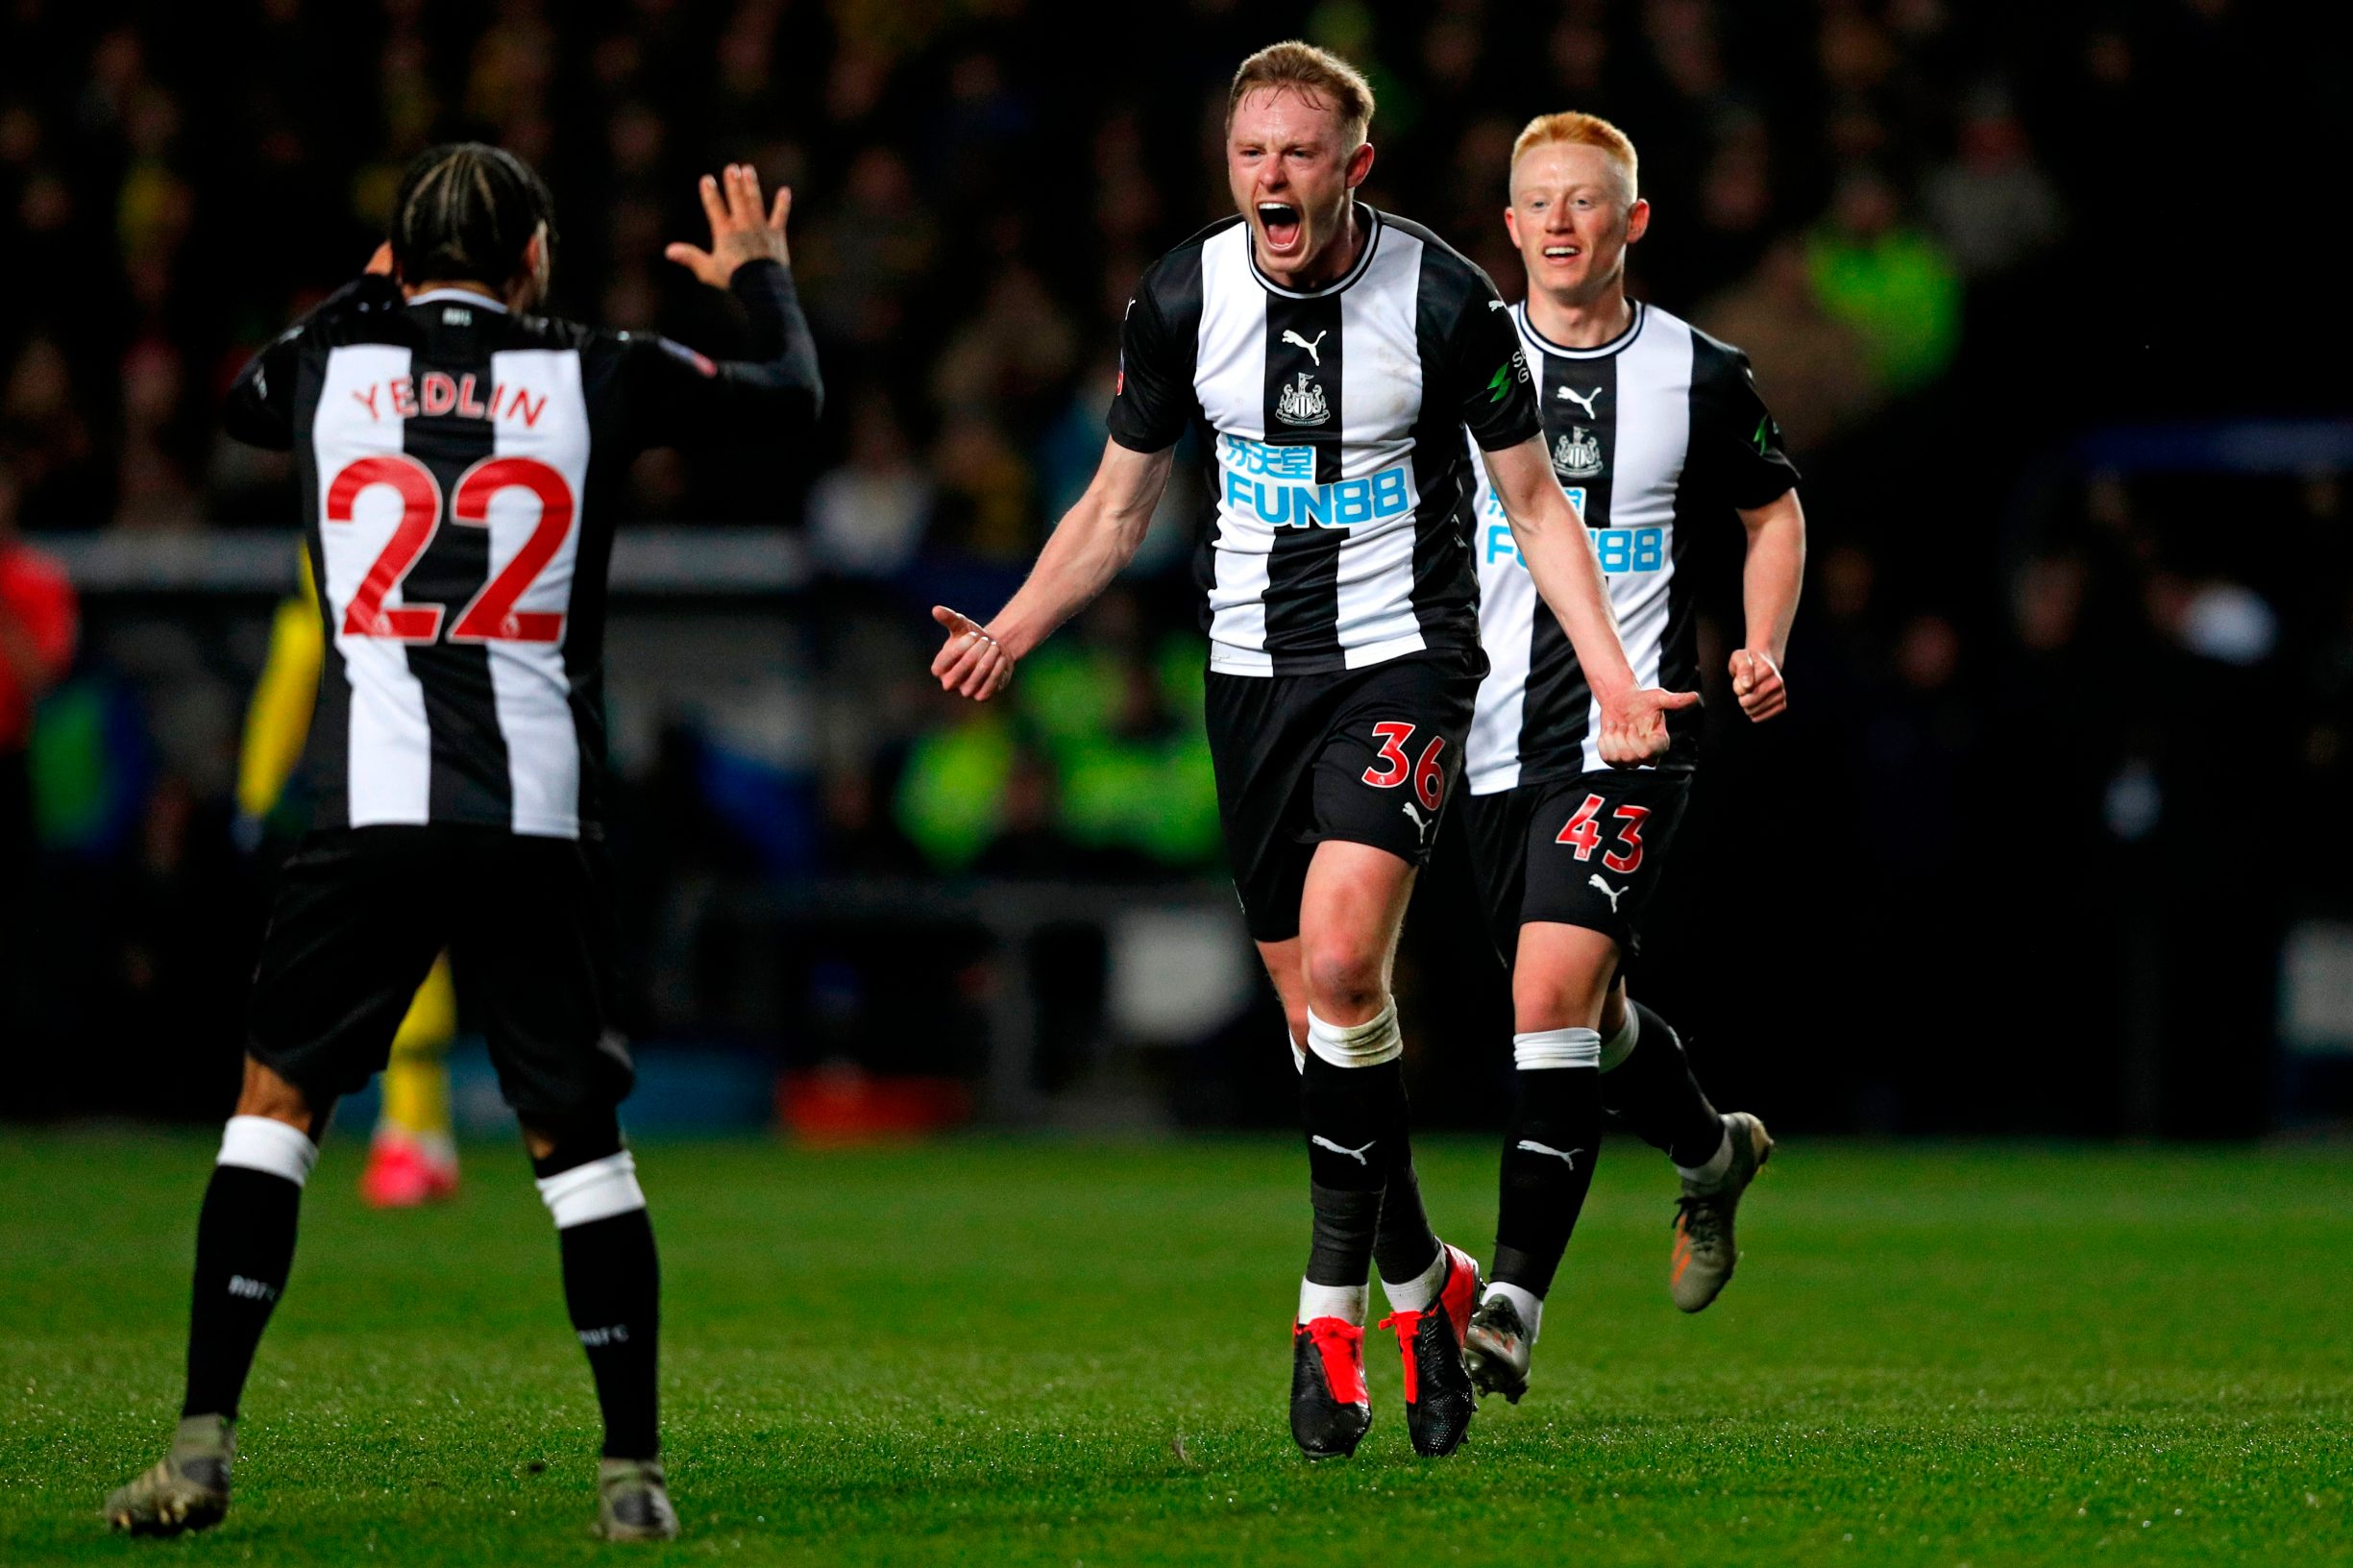 Newcastle United's English midfielder Sean Longstaff (C) celebrates with teammates after scoring the opening goal of the FA Cup fourth round replay football match between Oxford United and Newcastle United at the Kassam Stadium in Oxford, west of London, on February 4, 2020. (Photo by Adrian DENNIS / AFP) / RESTRICTED TO EDITORIAL USE. No use with unauthorized audio, video, data, fixture lists, club/league logos or 'live' services. Online in-match use limited to 120 images. An additional 40 images may be used in extra time. No video emulation. Social media in-match use limited to 120 images. An additional 40 images may be used in extra time. No use in betting publications, games or single club/league/player publications. / 